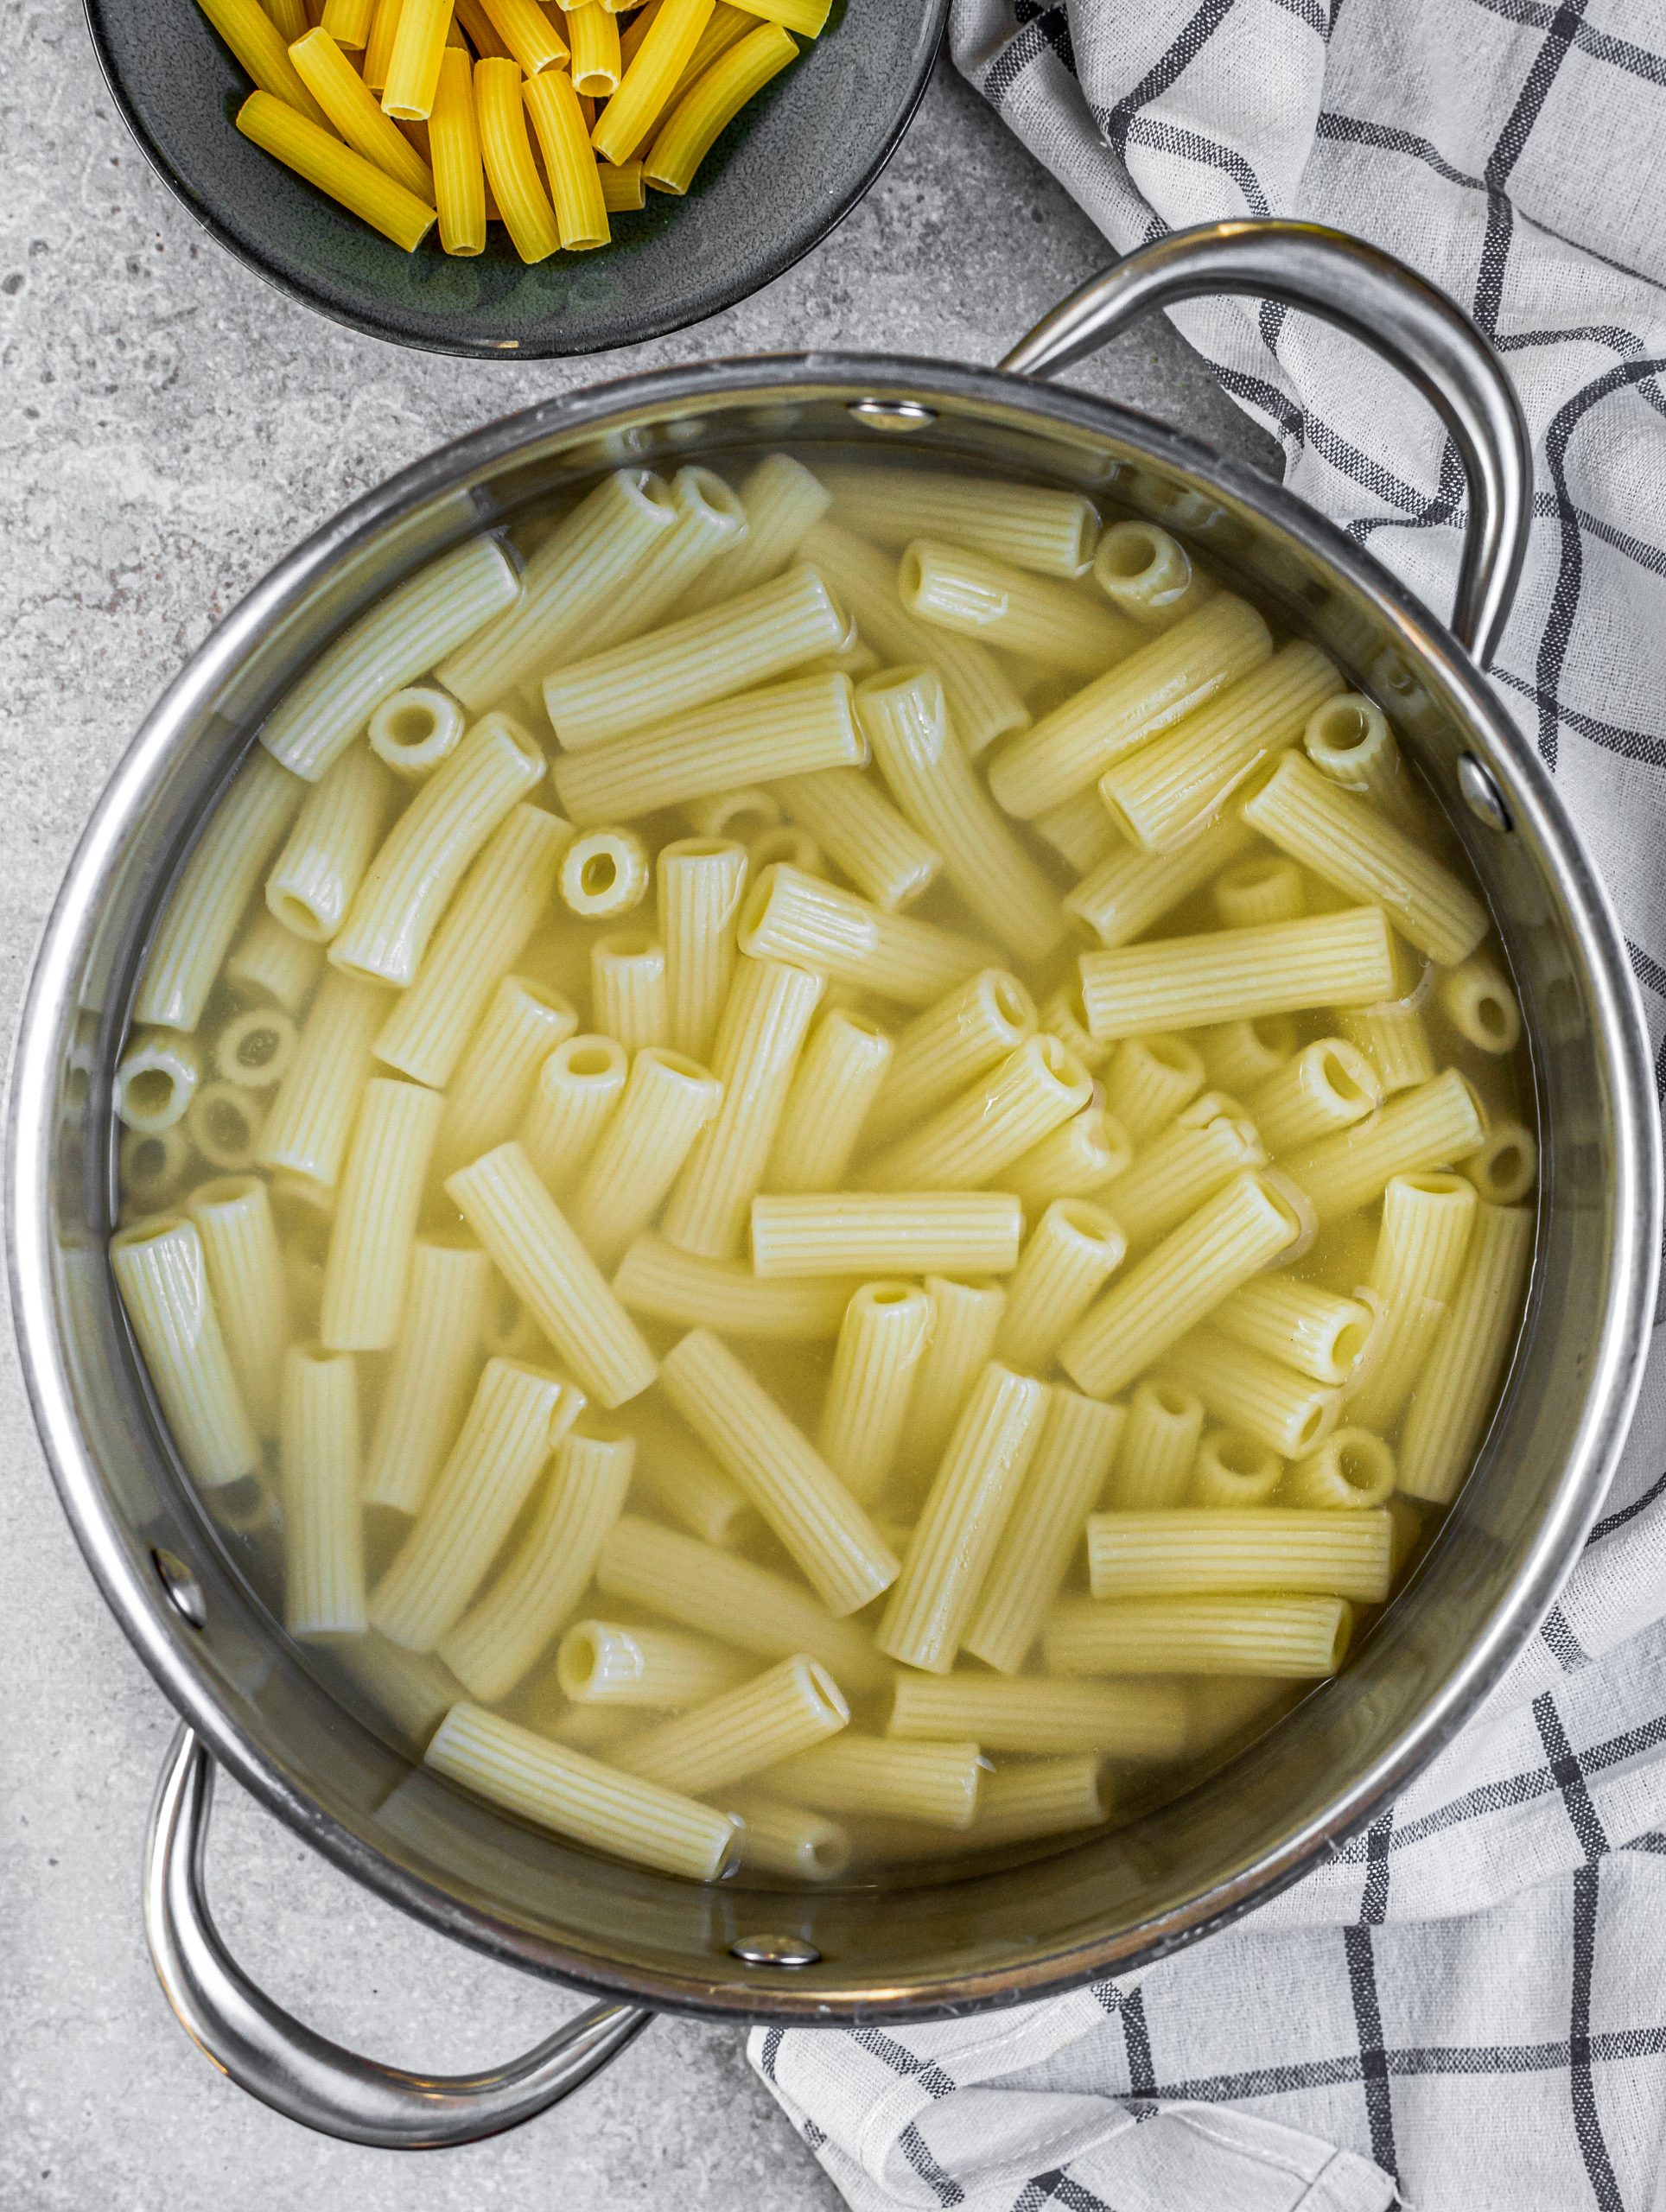 Cook the rigatoni in a pot of boiling water until done to your liking. Reserve ½ cup of the water, and drain the pasta well.